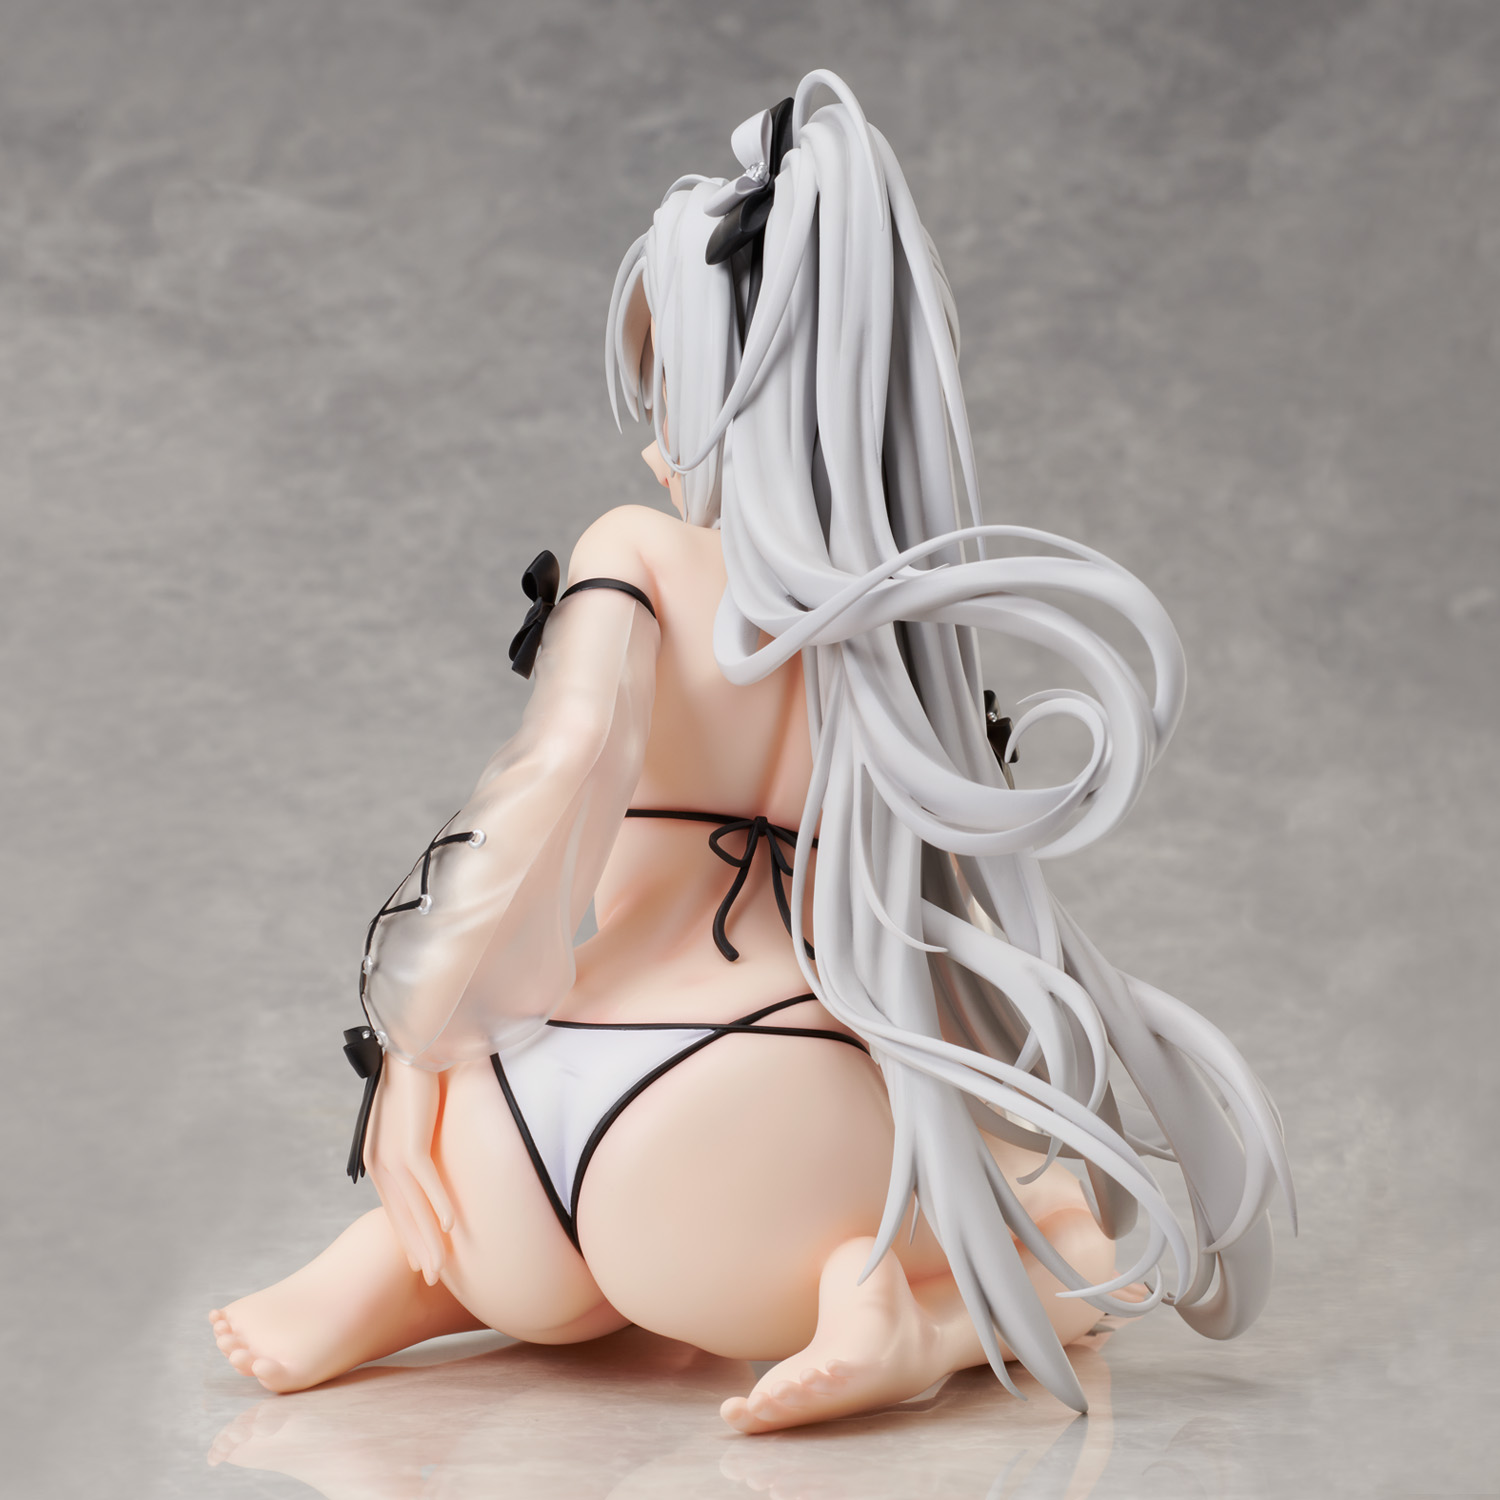 azur-lane-drake-14-scale-figure-the-golden-hinds-respite-ver image count 2